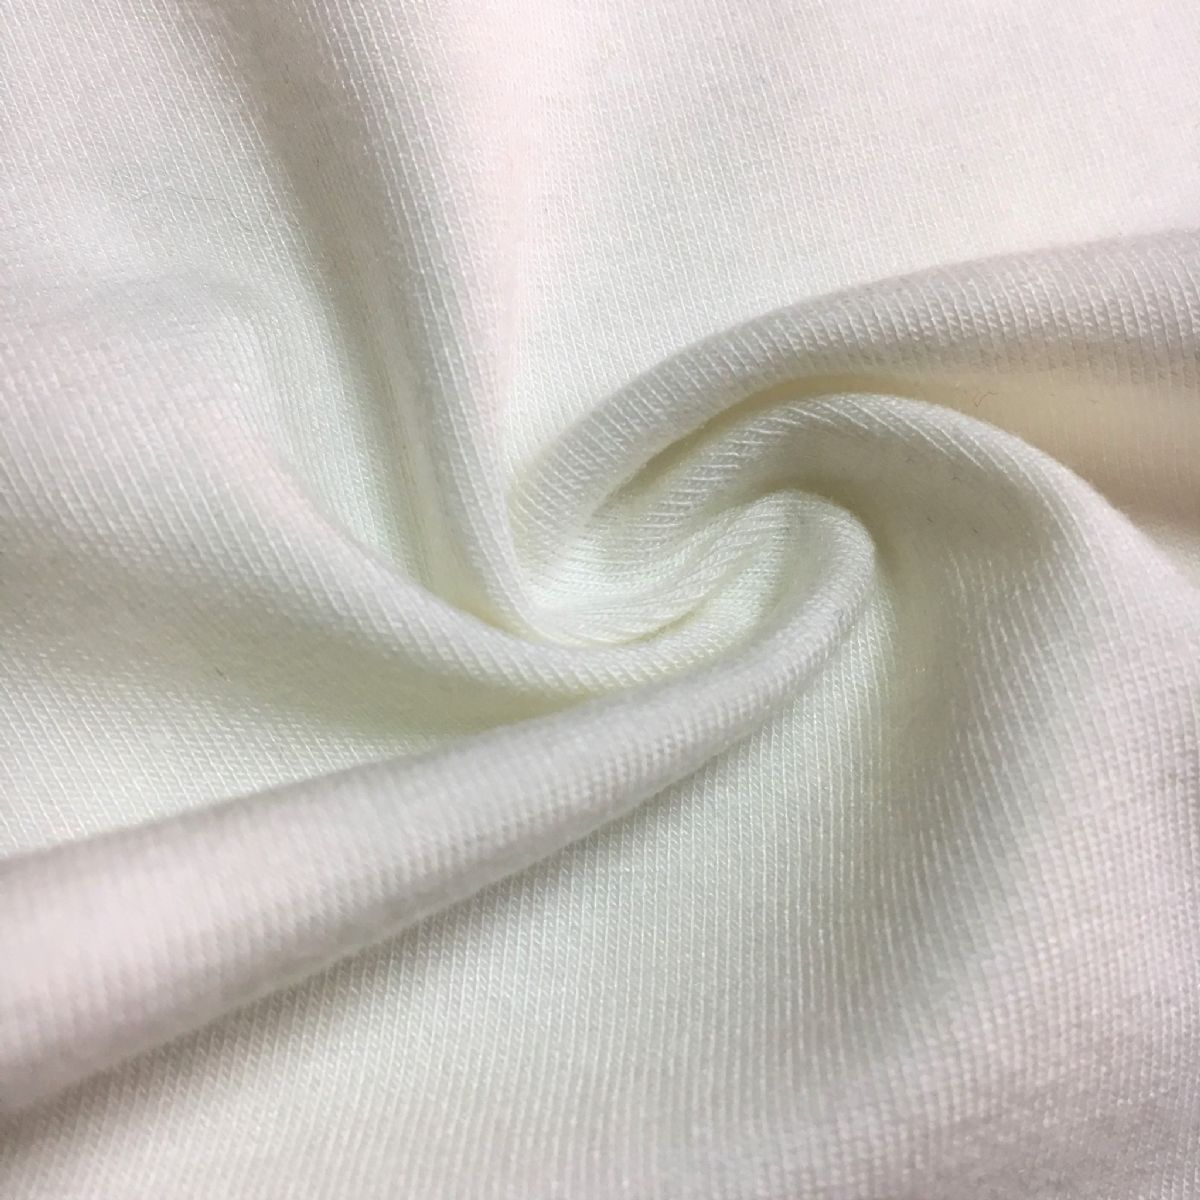 Modal Fabric vs. Cotton: How are They different?